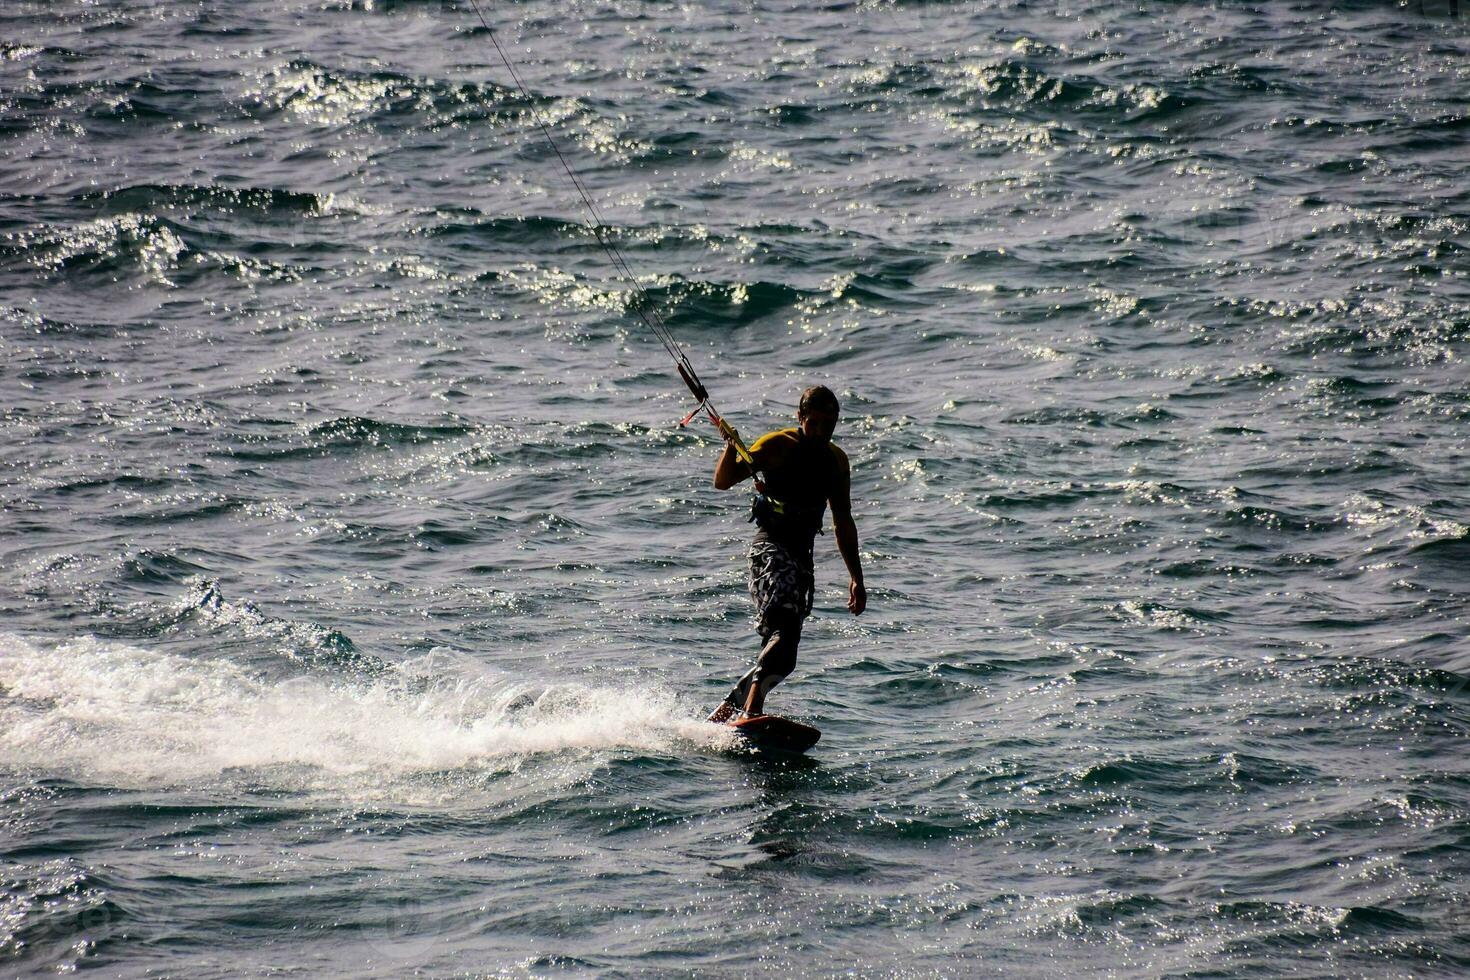 Surfing in the ocean photo